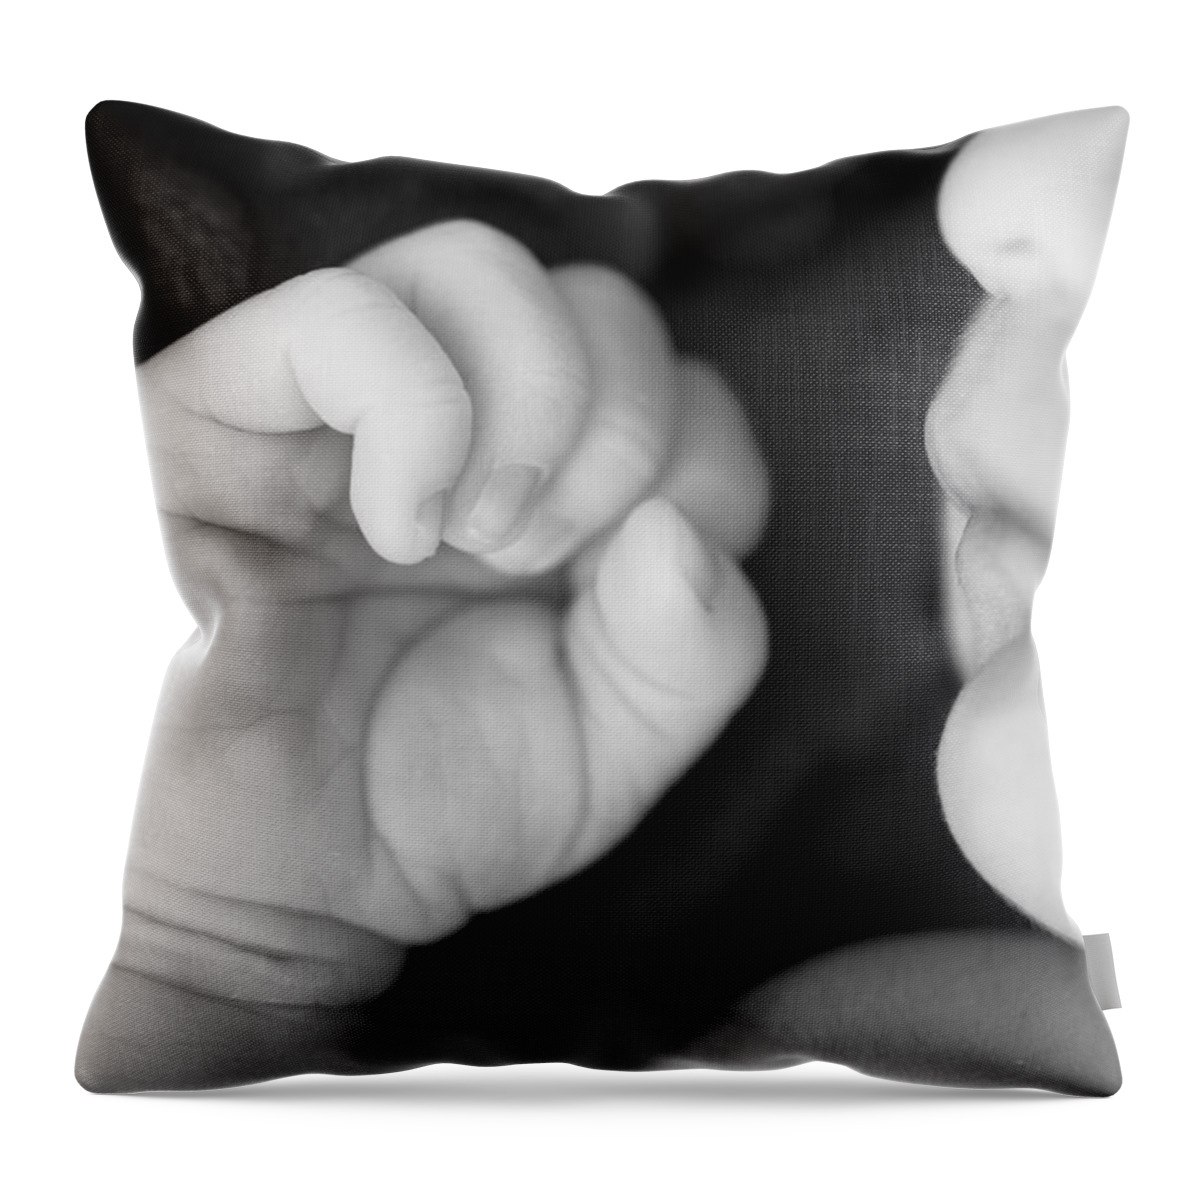  Throw Pillow featuring the photograph Max #4 by Marlo Horne